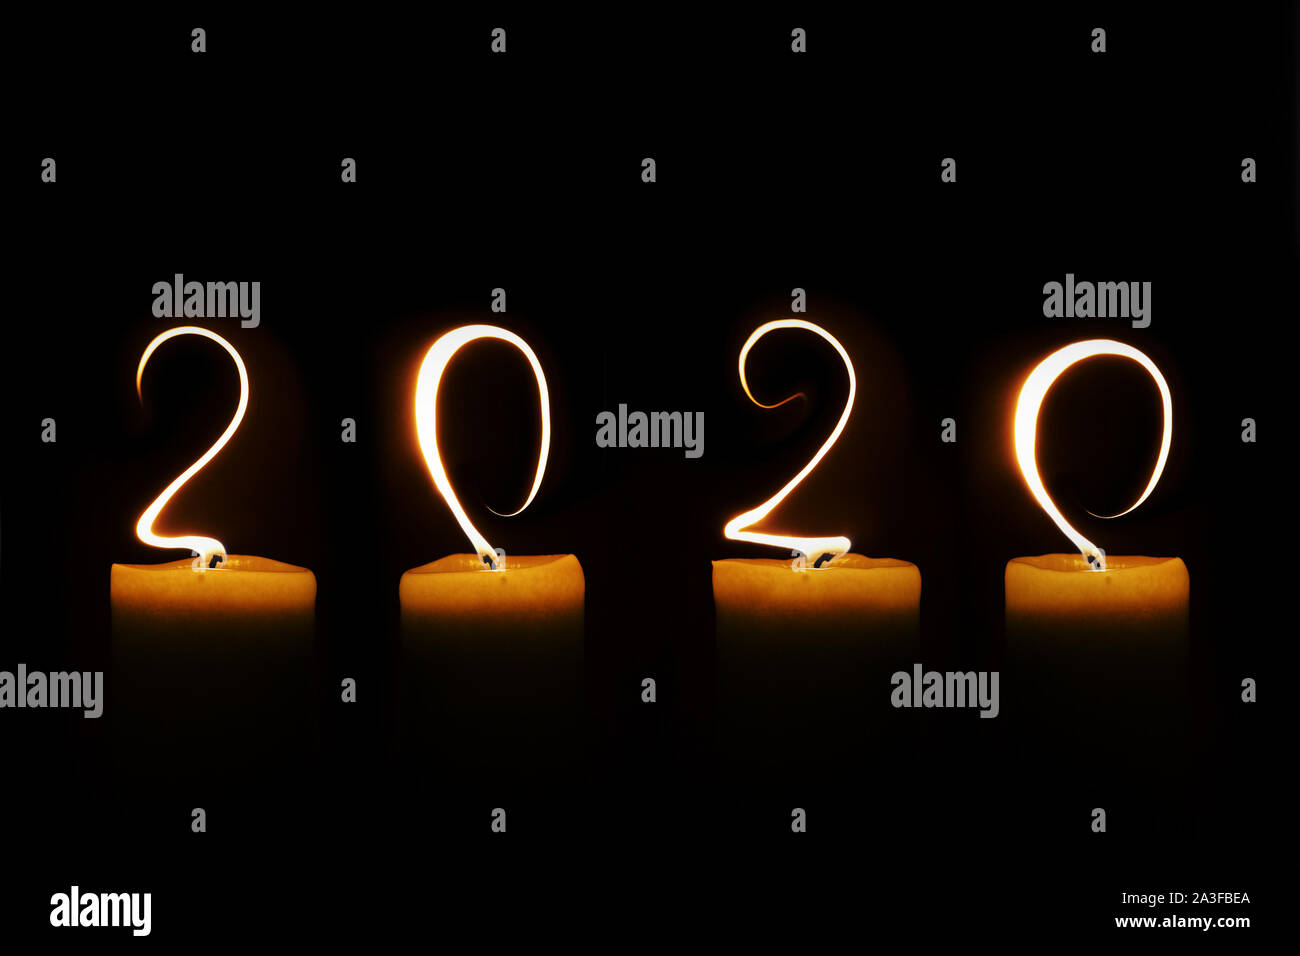 2020 written with candle flames on black background, greeting card Stock Photo